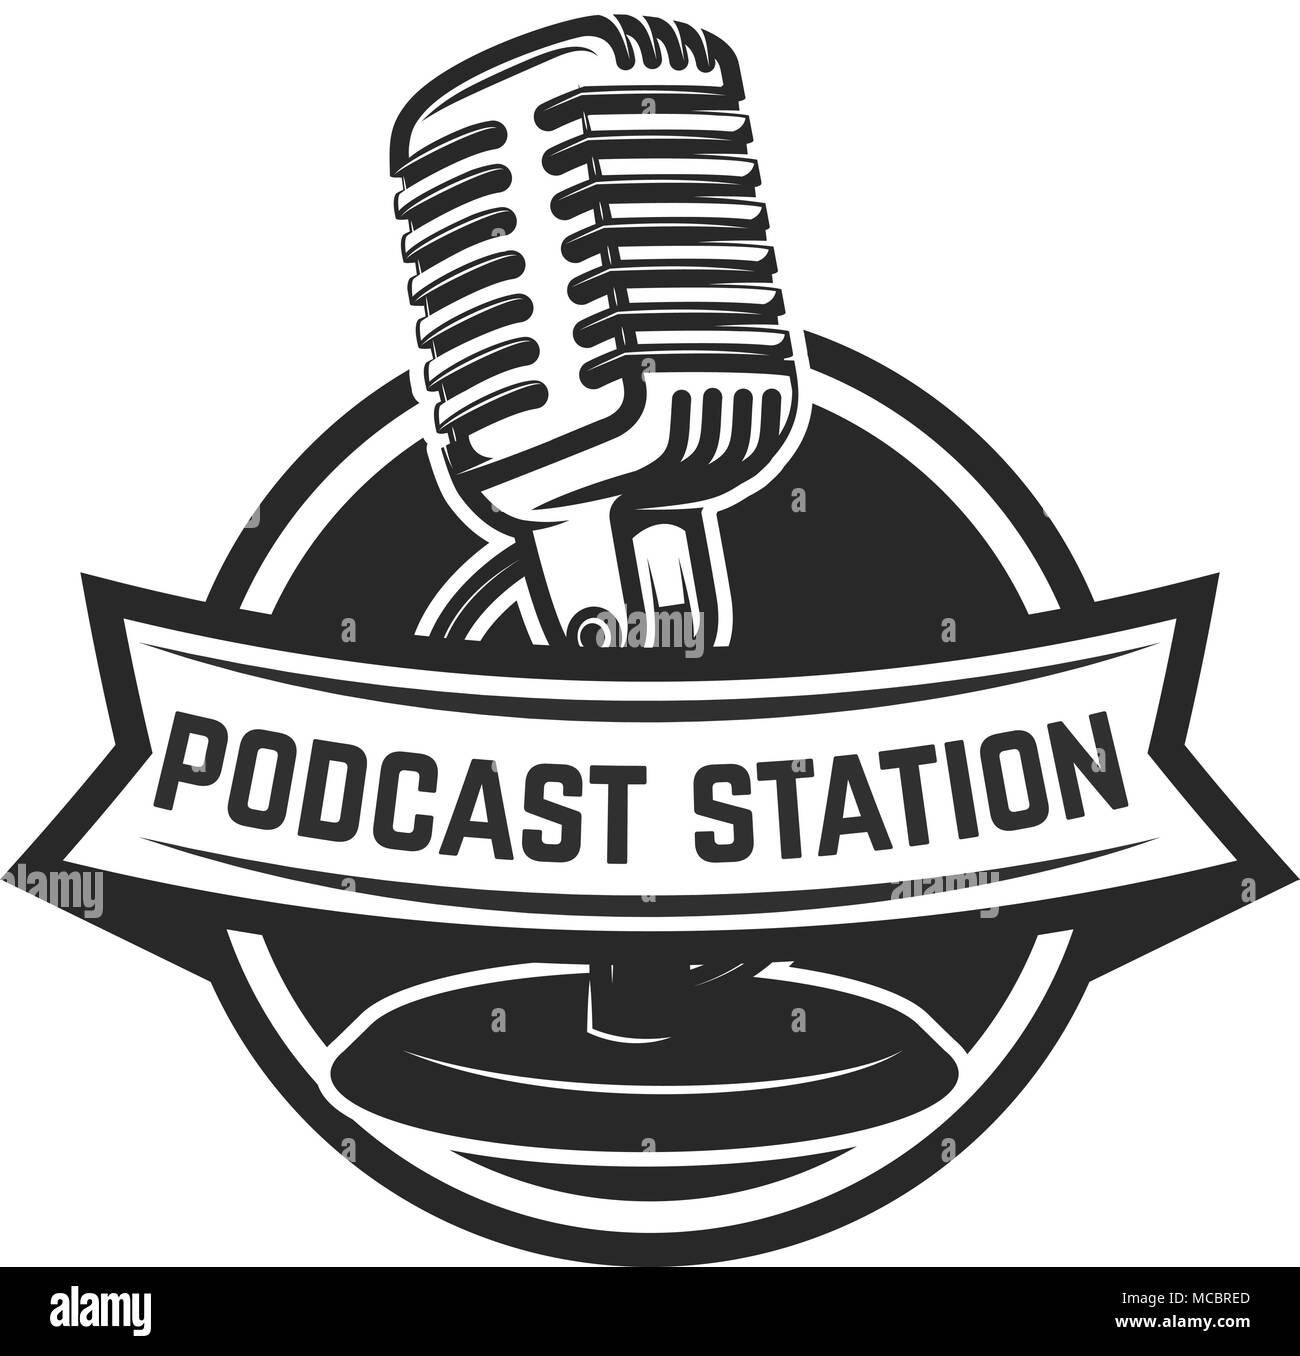 Podcast station. Emblem template with retro microphone. Design